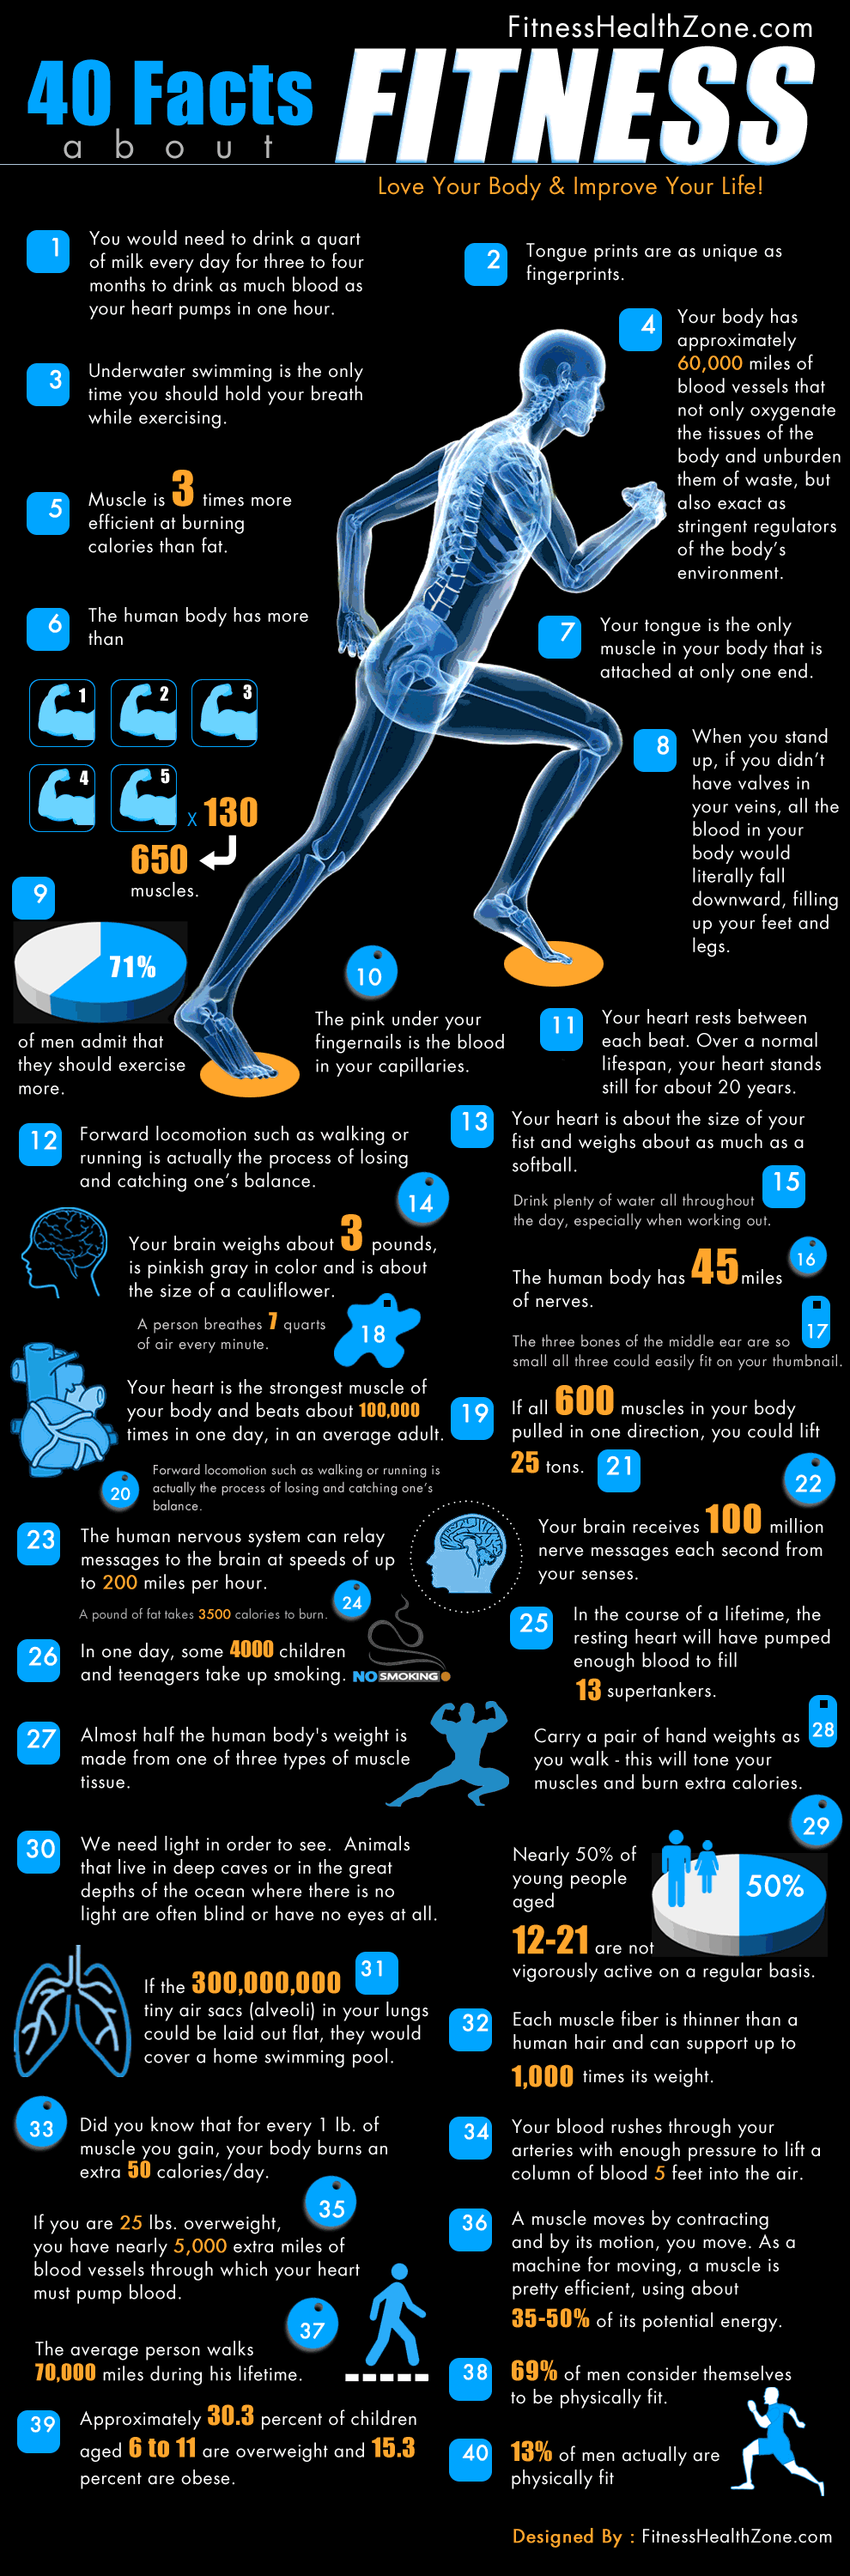 40 Facts About Fitness